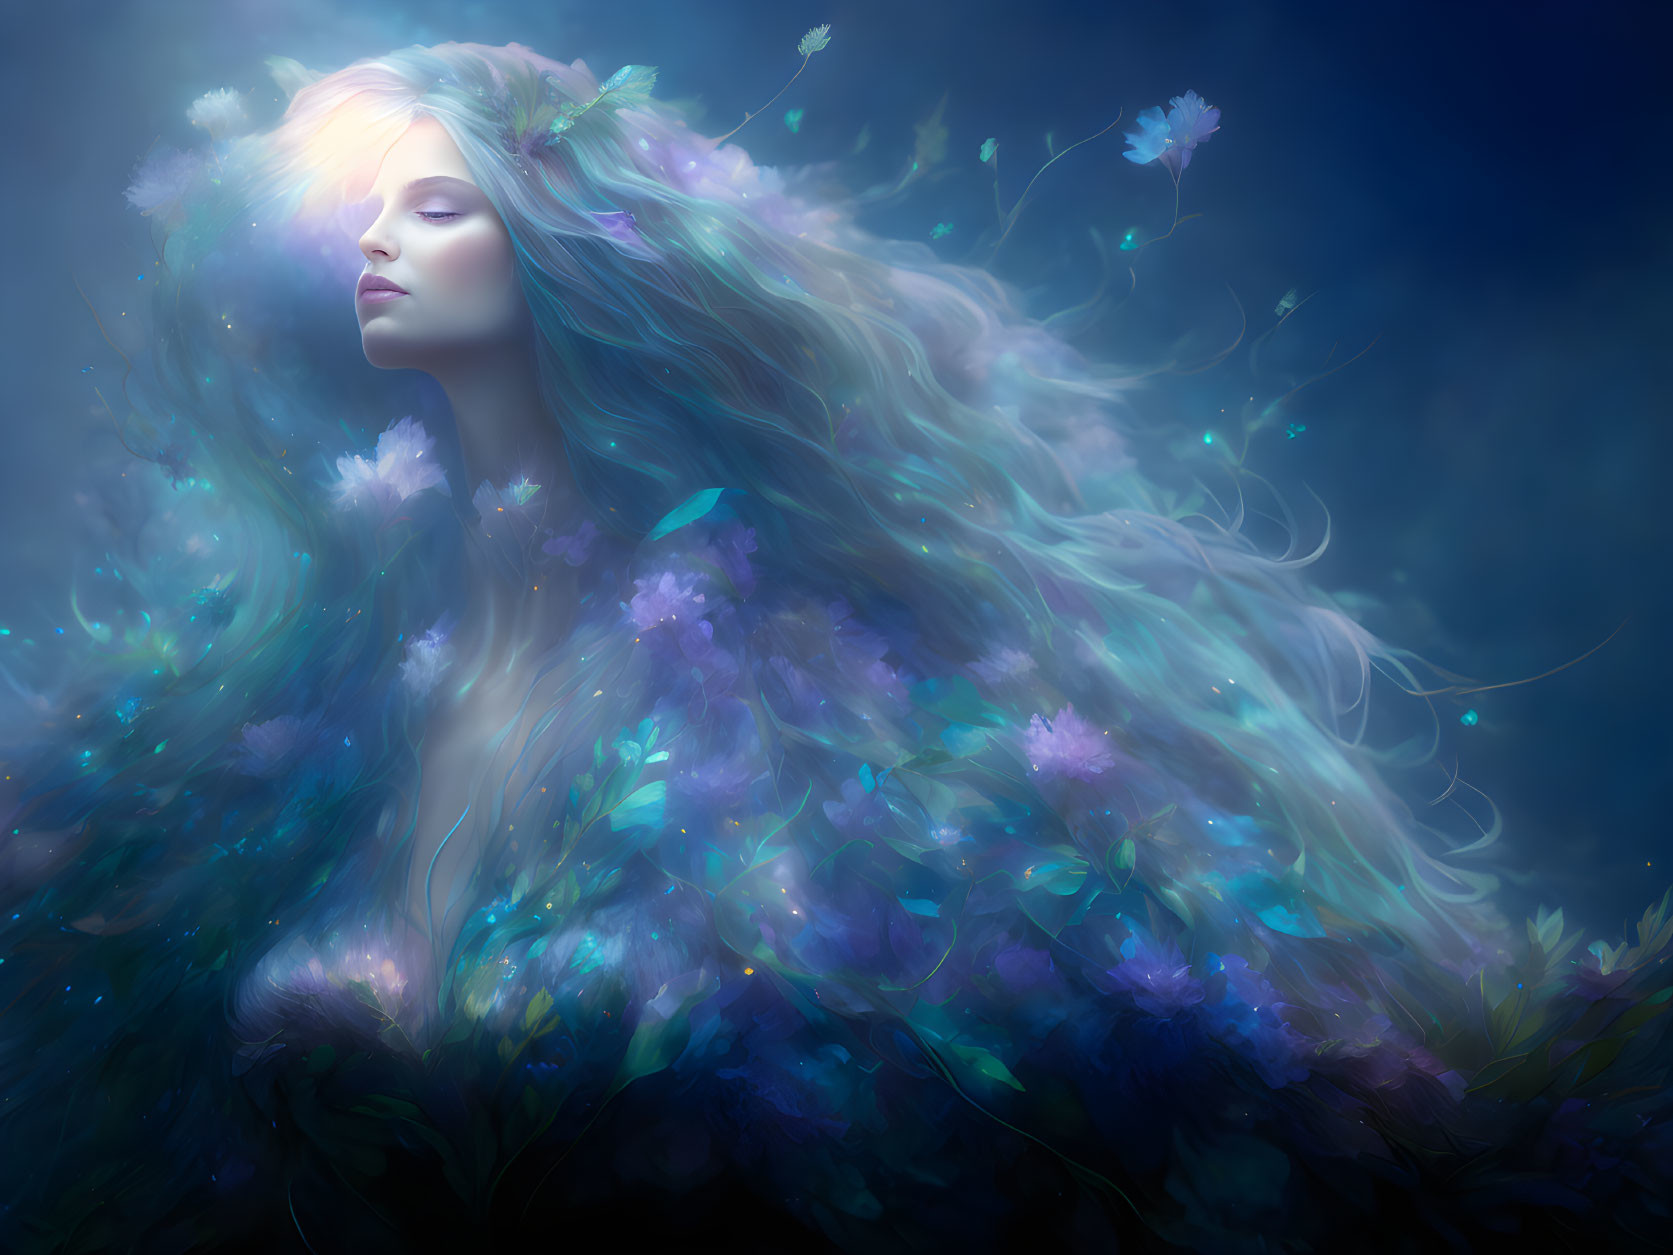 Ethereal woman with flower-adorned hair in mystical blue light